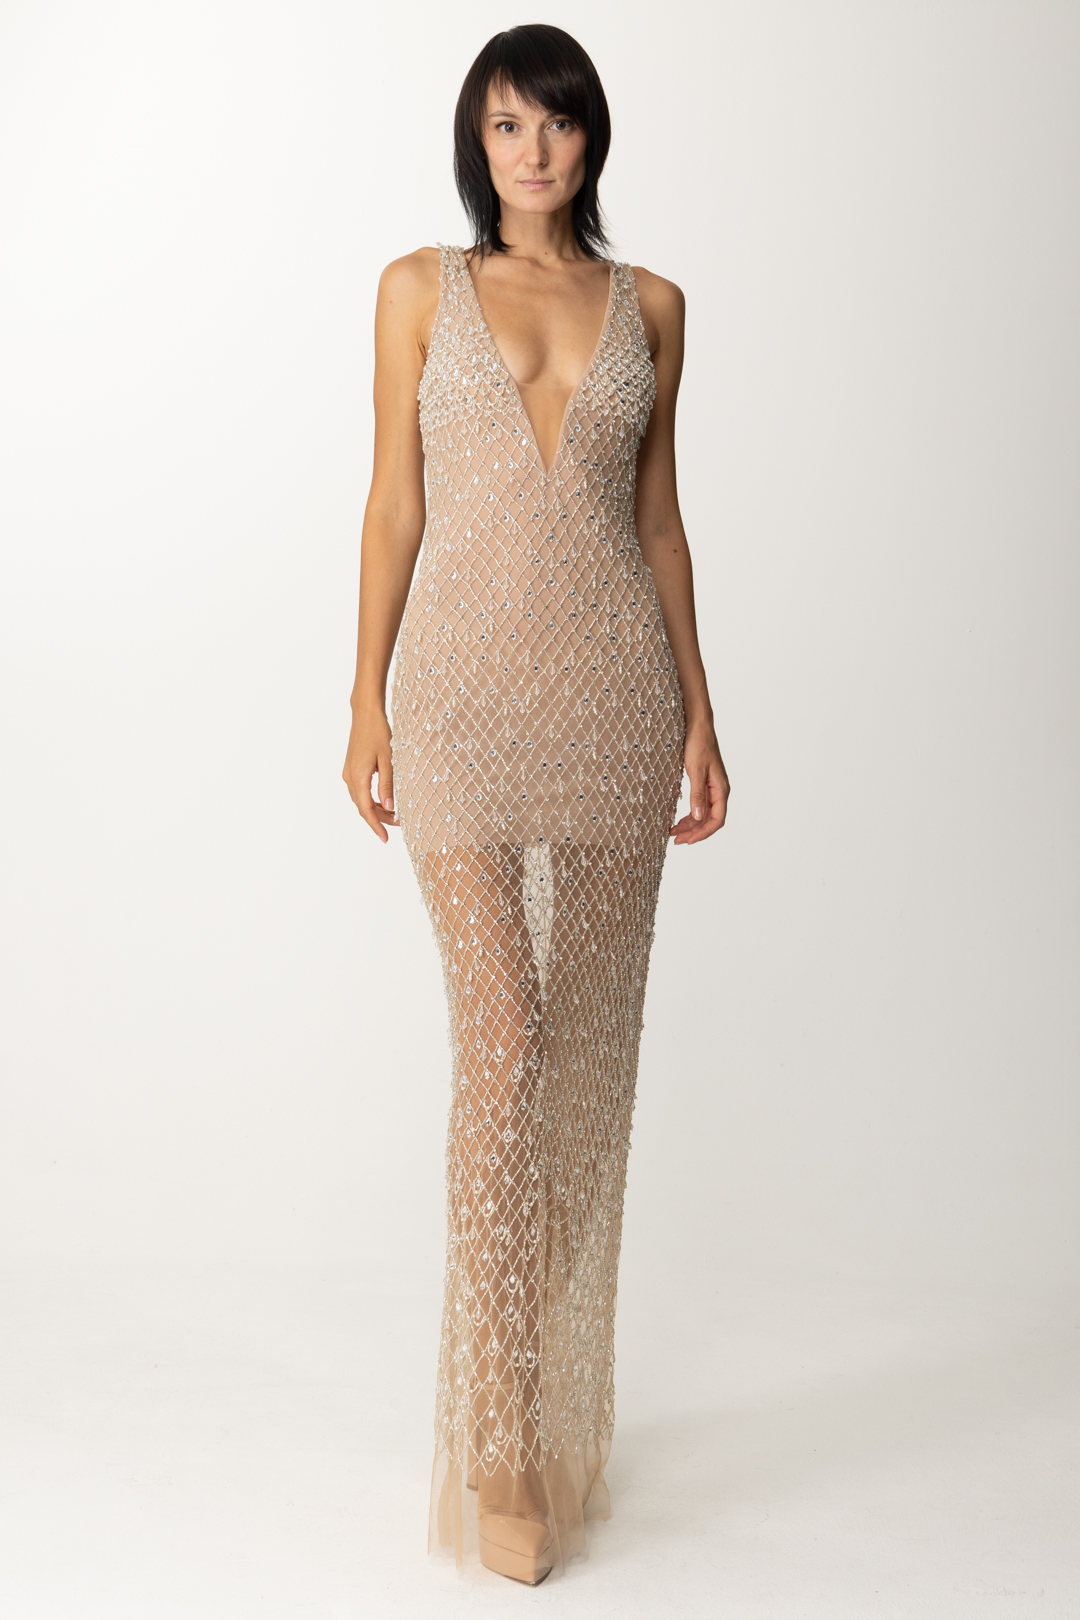 Preview: Elisabetta Franchi Red Carpet dress in embroidered tulle Nudo/Cristal